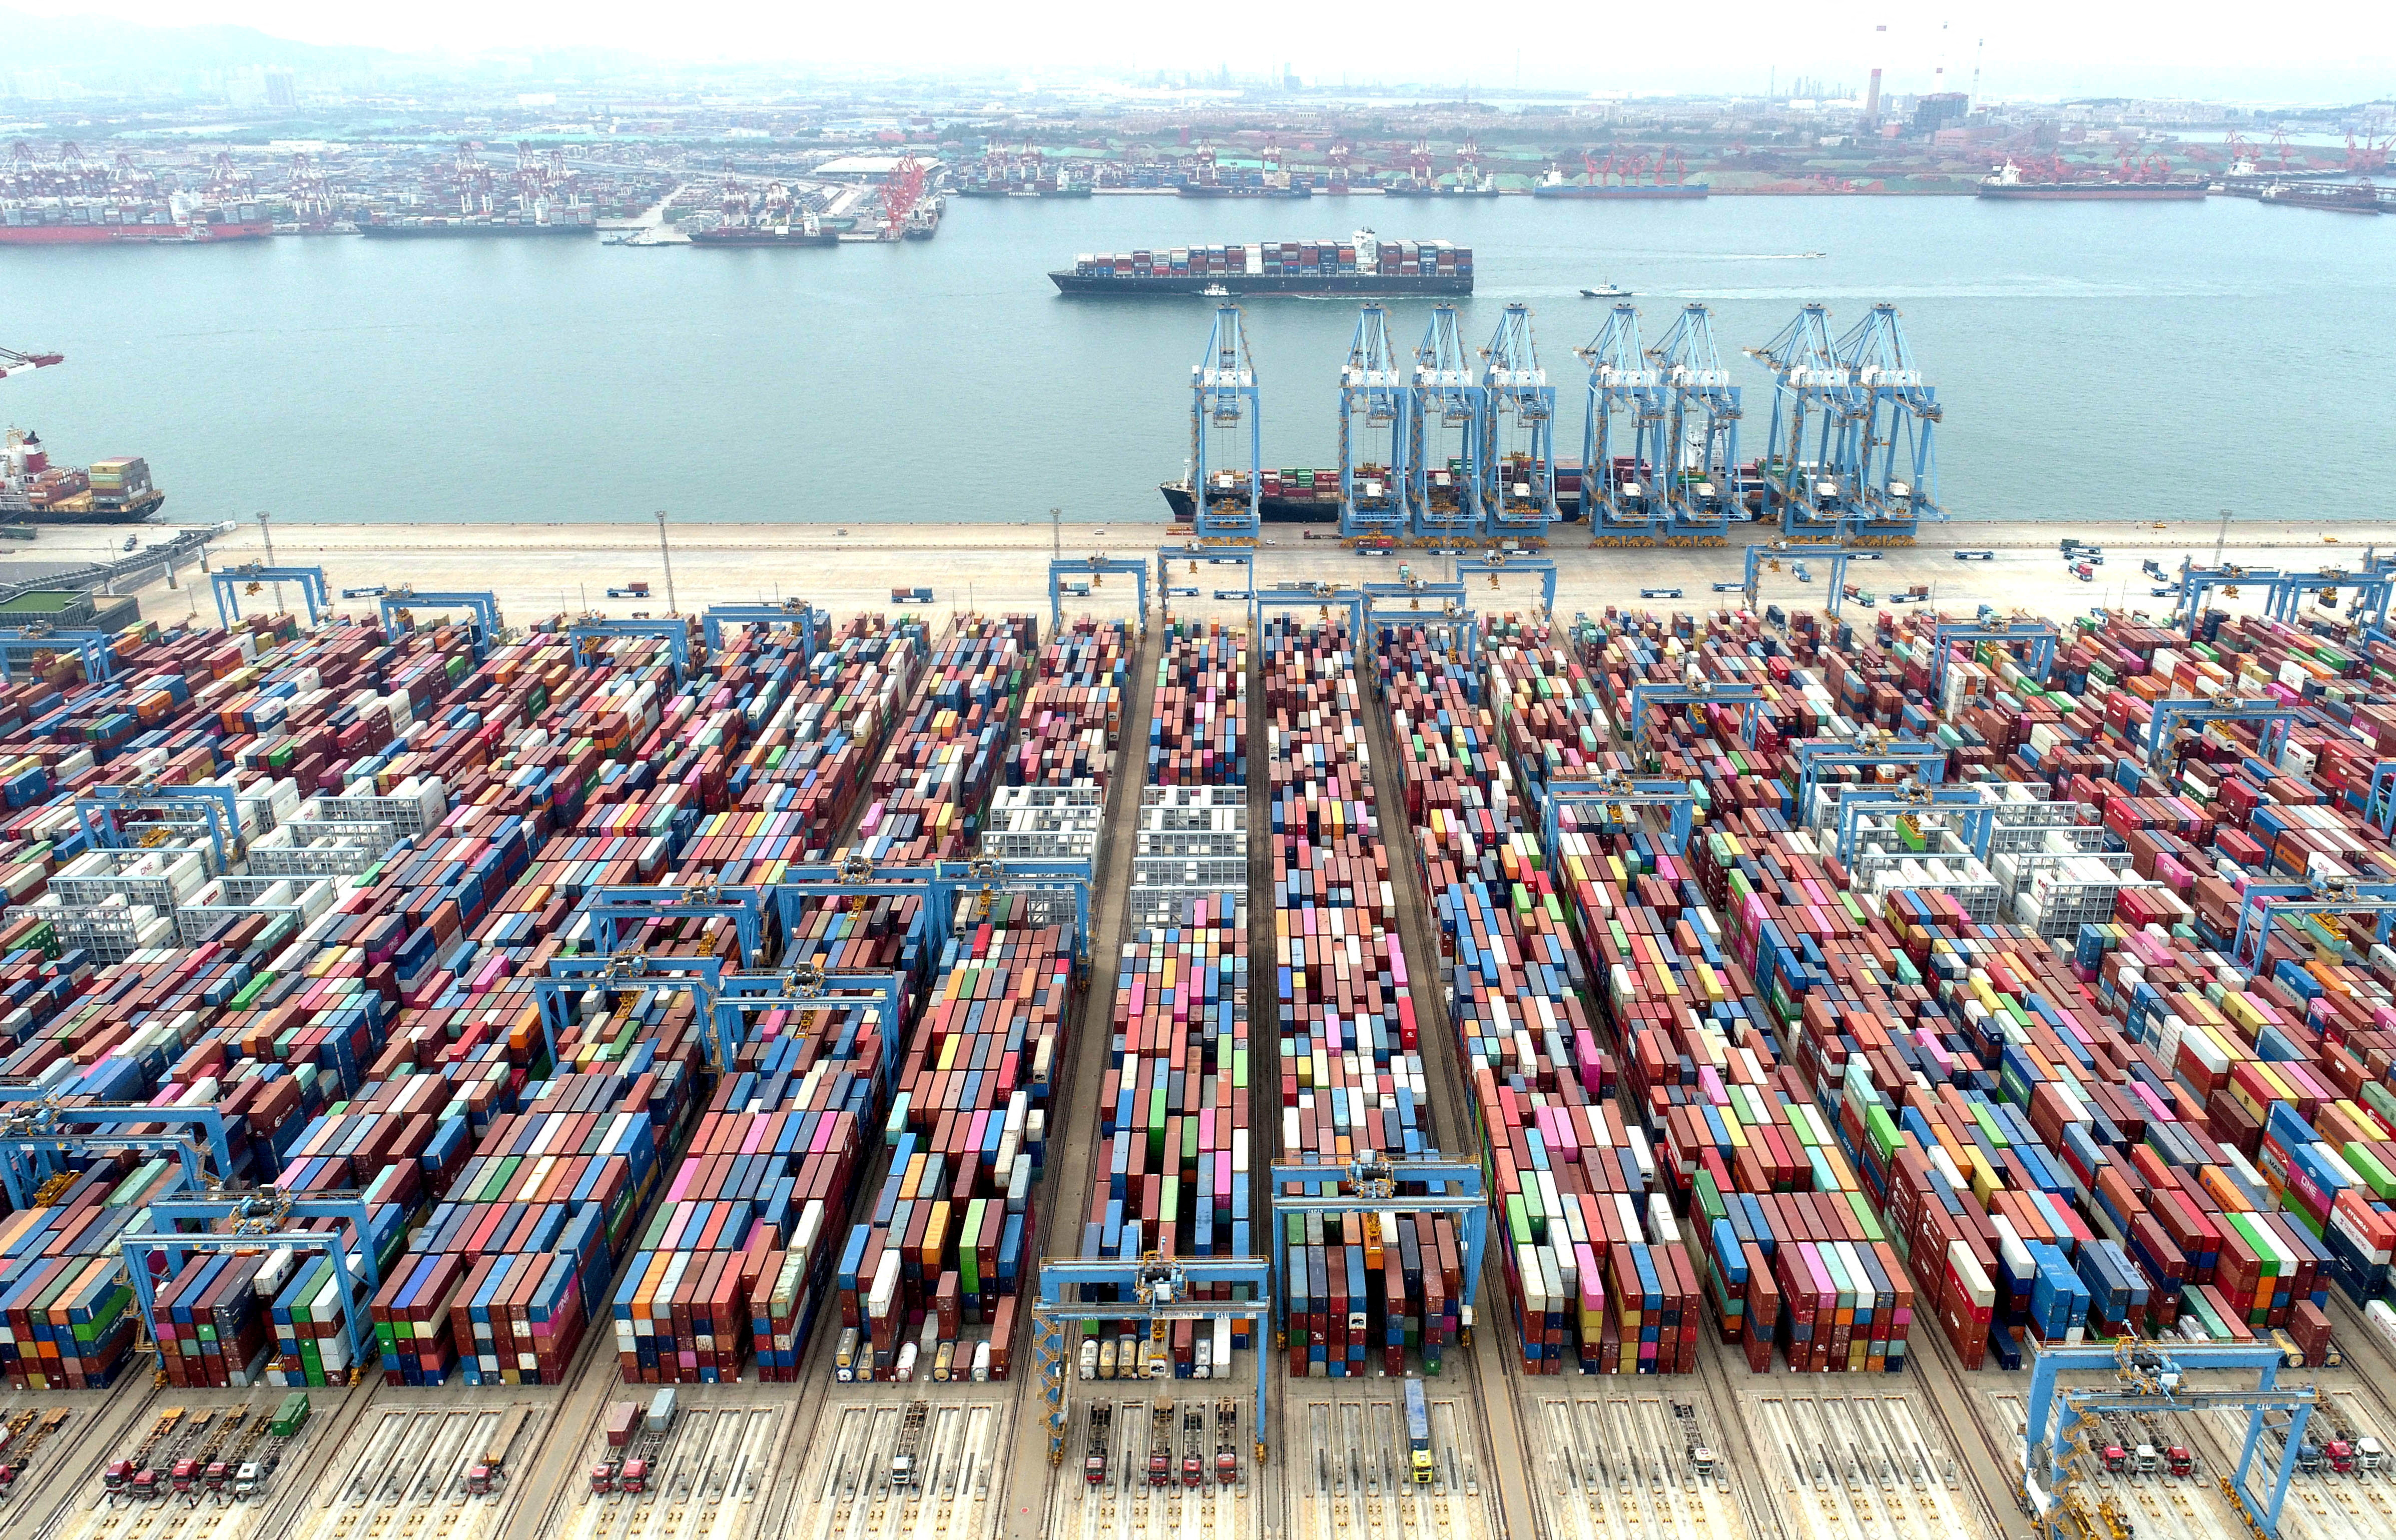 File photo of the Port of Qingdao, China